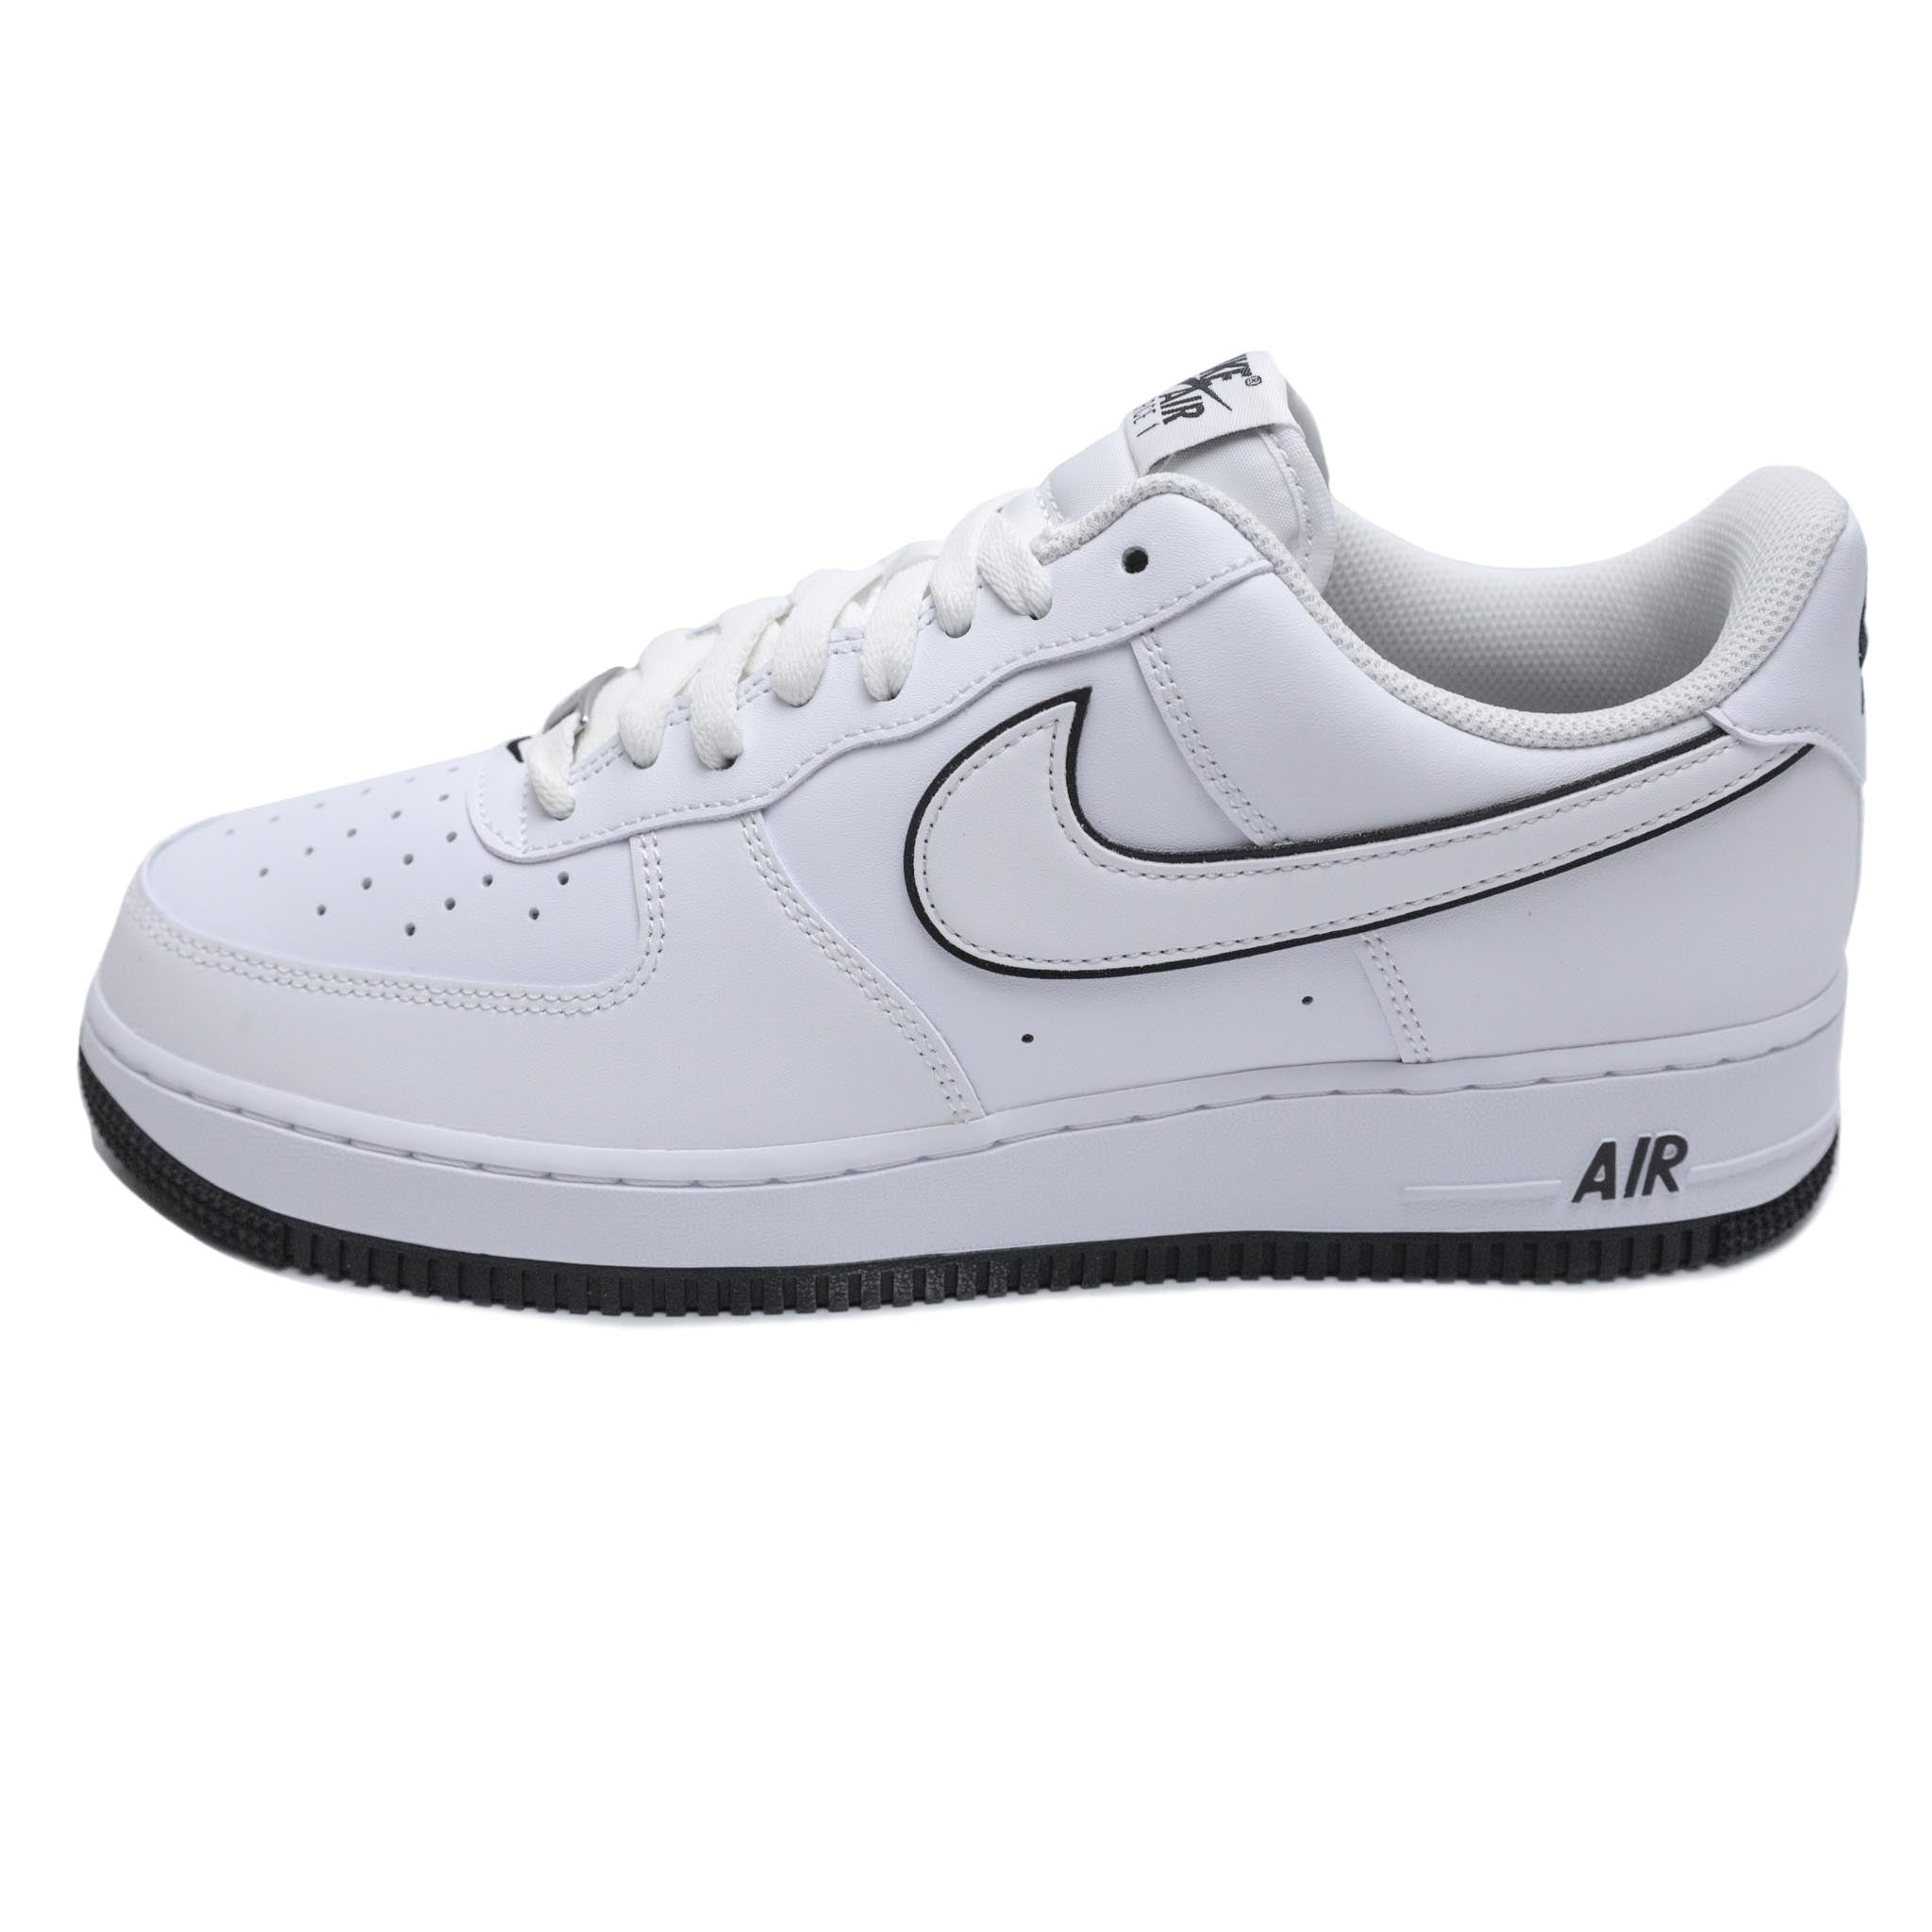 Nike Air Force 1 Low '07 'White/Black Outline' & SNEAKERBOX